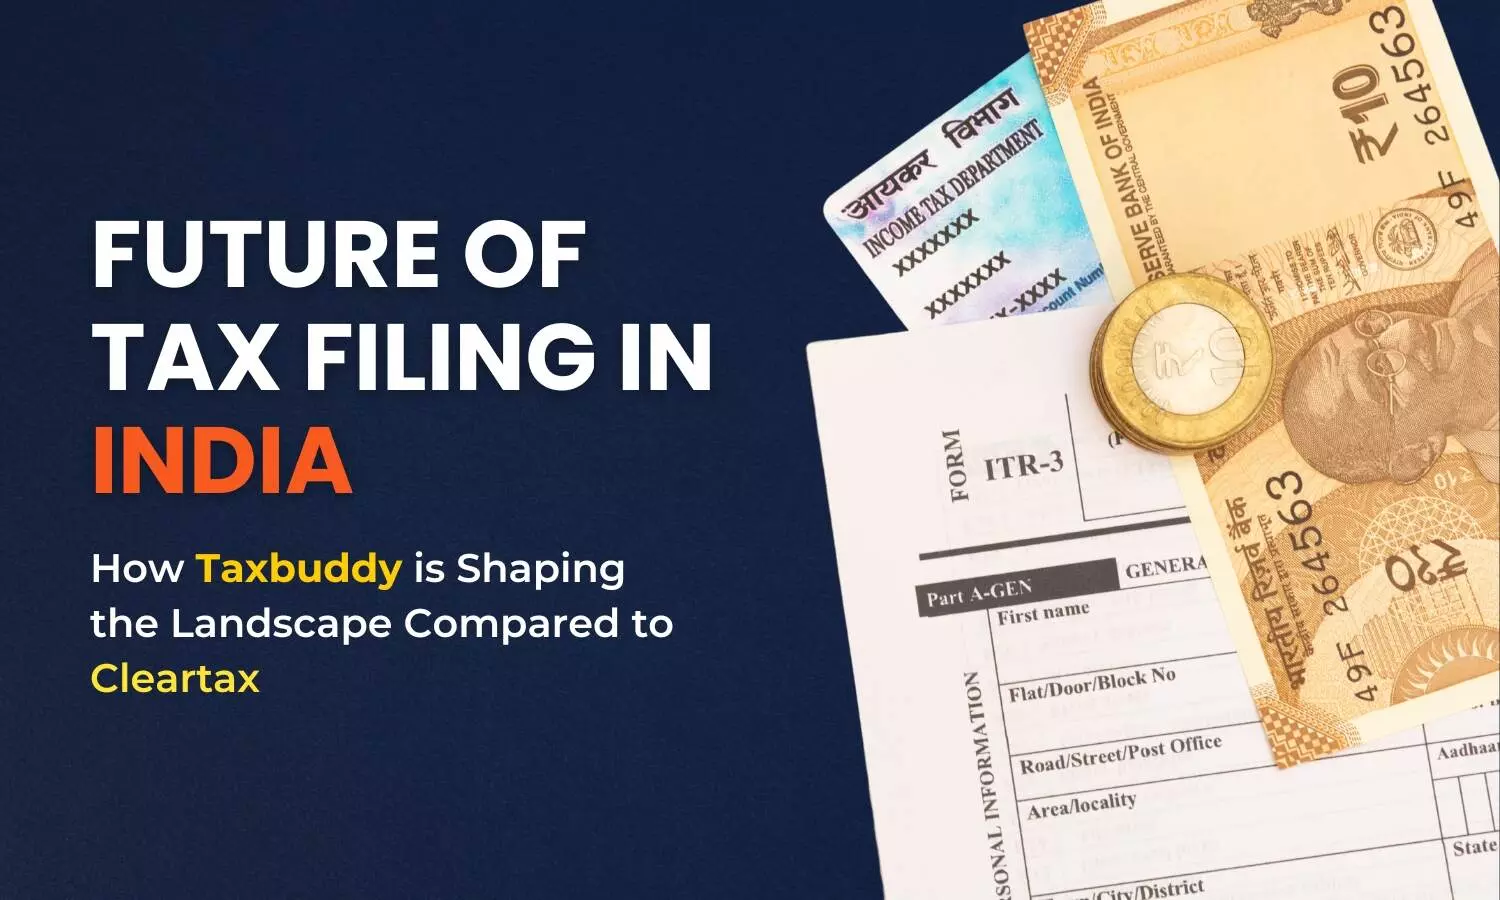 Future of Tax Filing in India: How Taxbuddy is Shaping the Landscape Compared to Cleartax